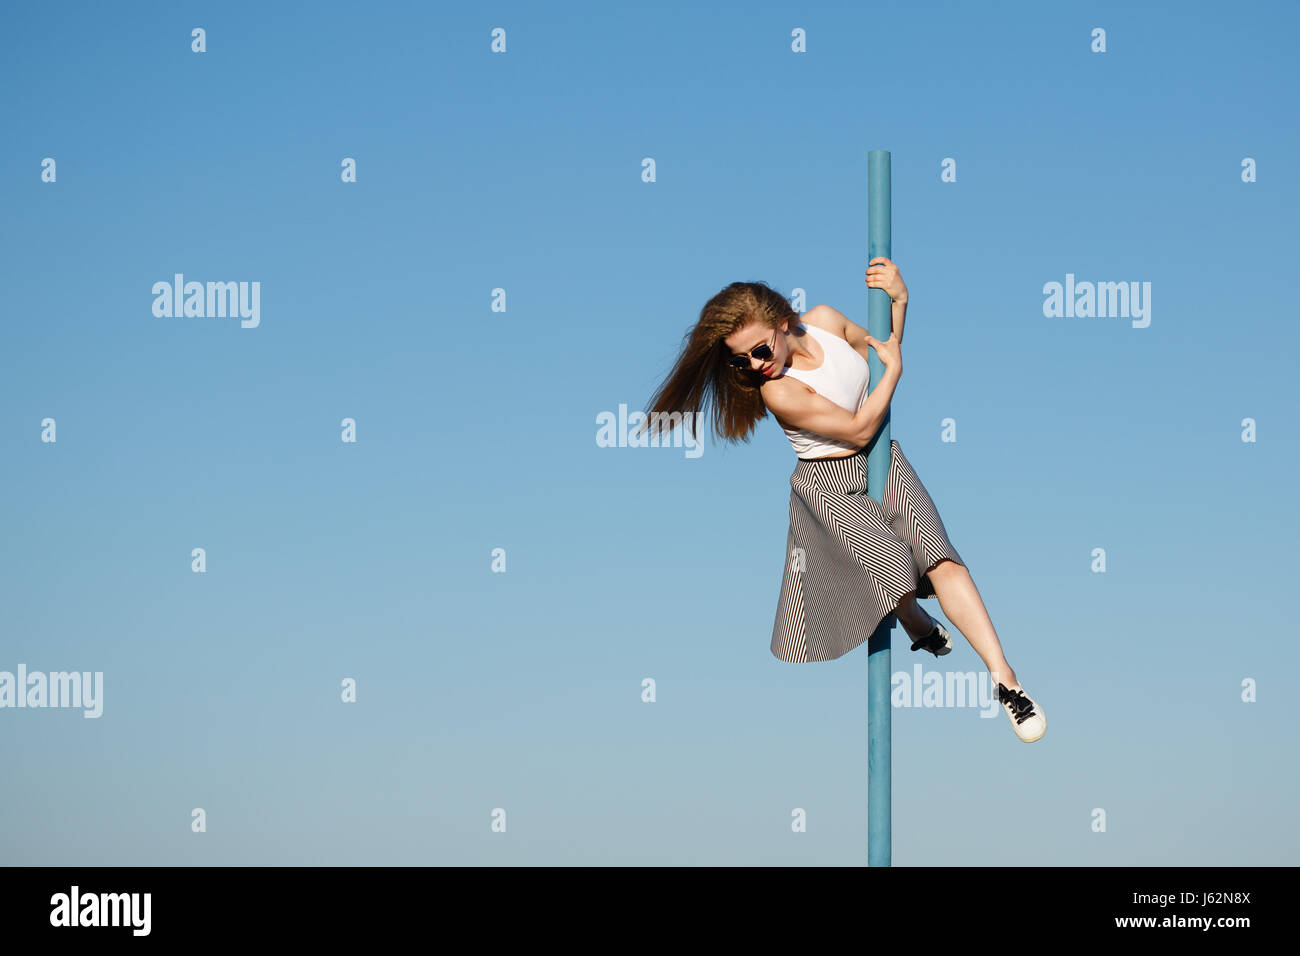 Young attractive girl hipster dancing on the pole. She is wearing a top, a skirt and sunglasses. Flying hair. The concept of life in motion. Stock Photo